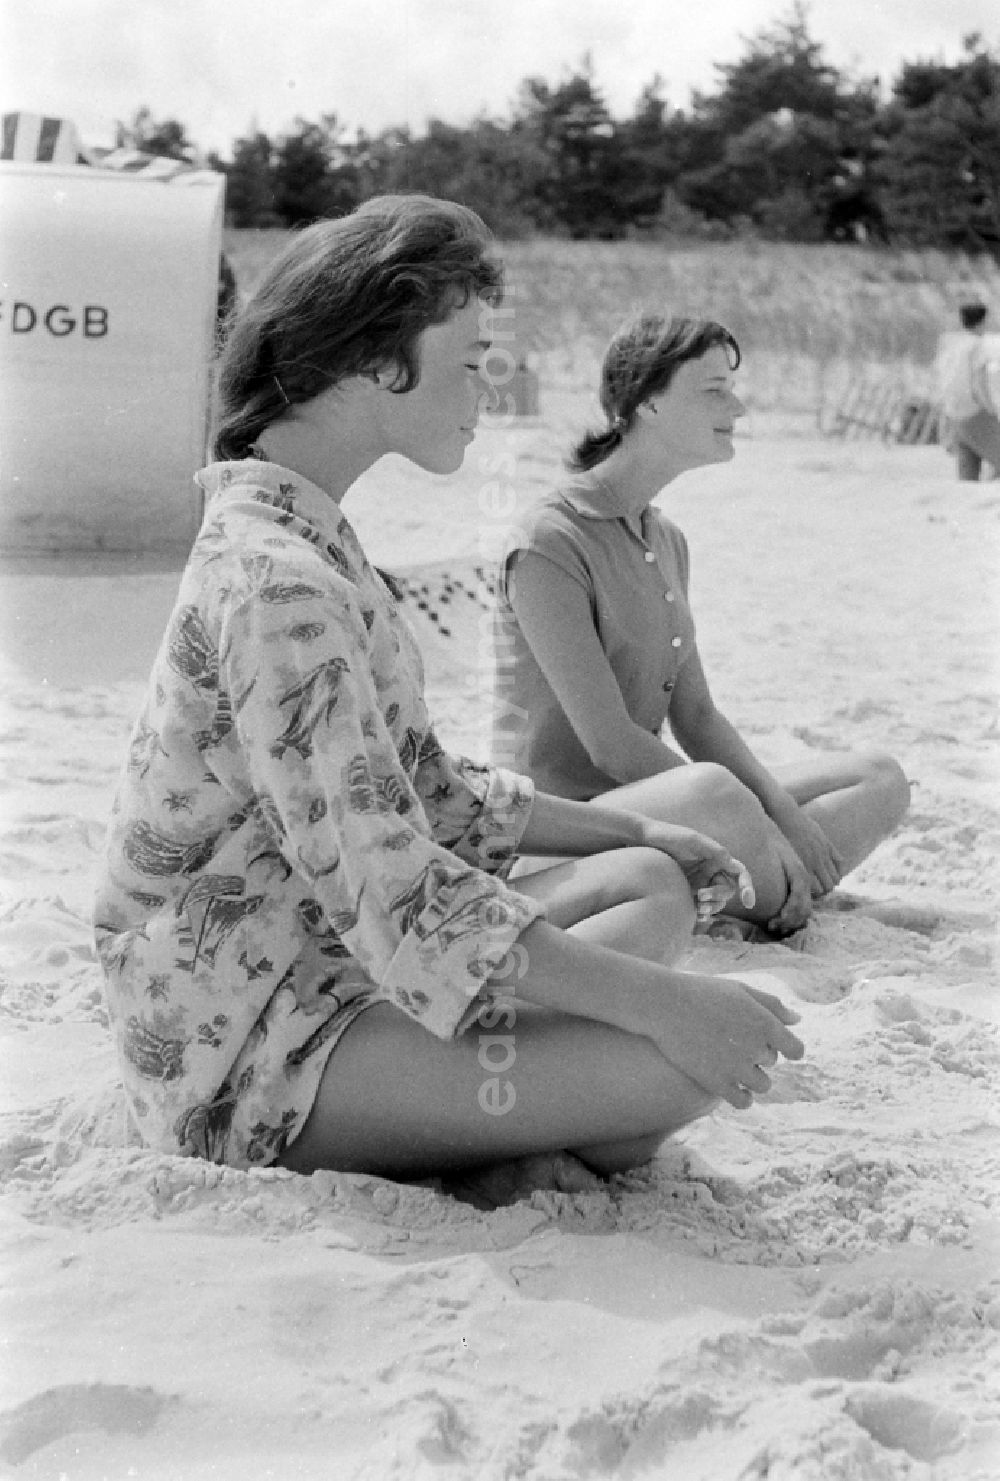 GDR image archive: Prerow - Sporting exercises for beach gymnastics in Prerow in the state Mecklenburg-Western Pomerania on the territory of the former GDR, German Democratic Republic